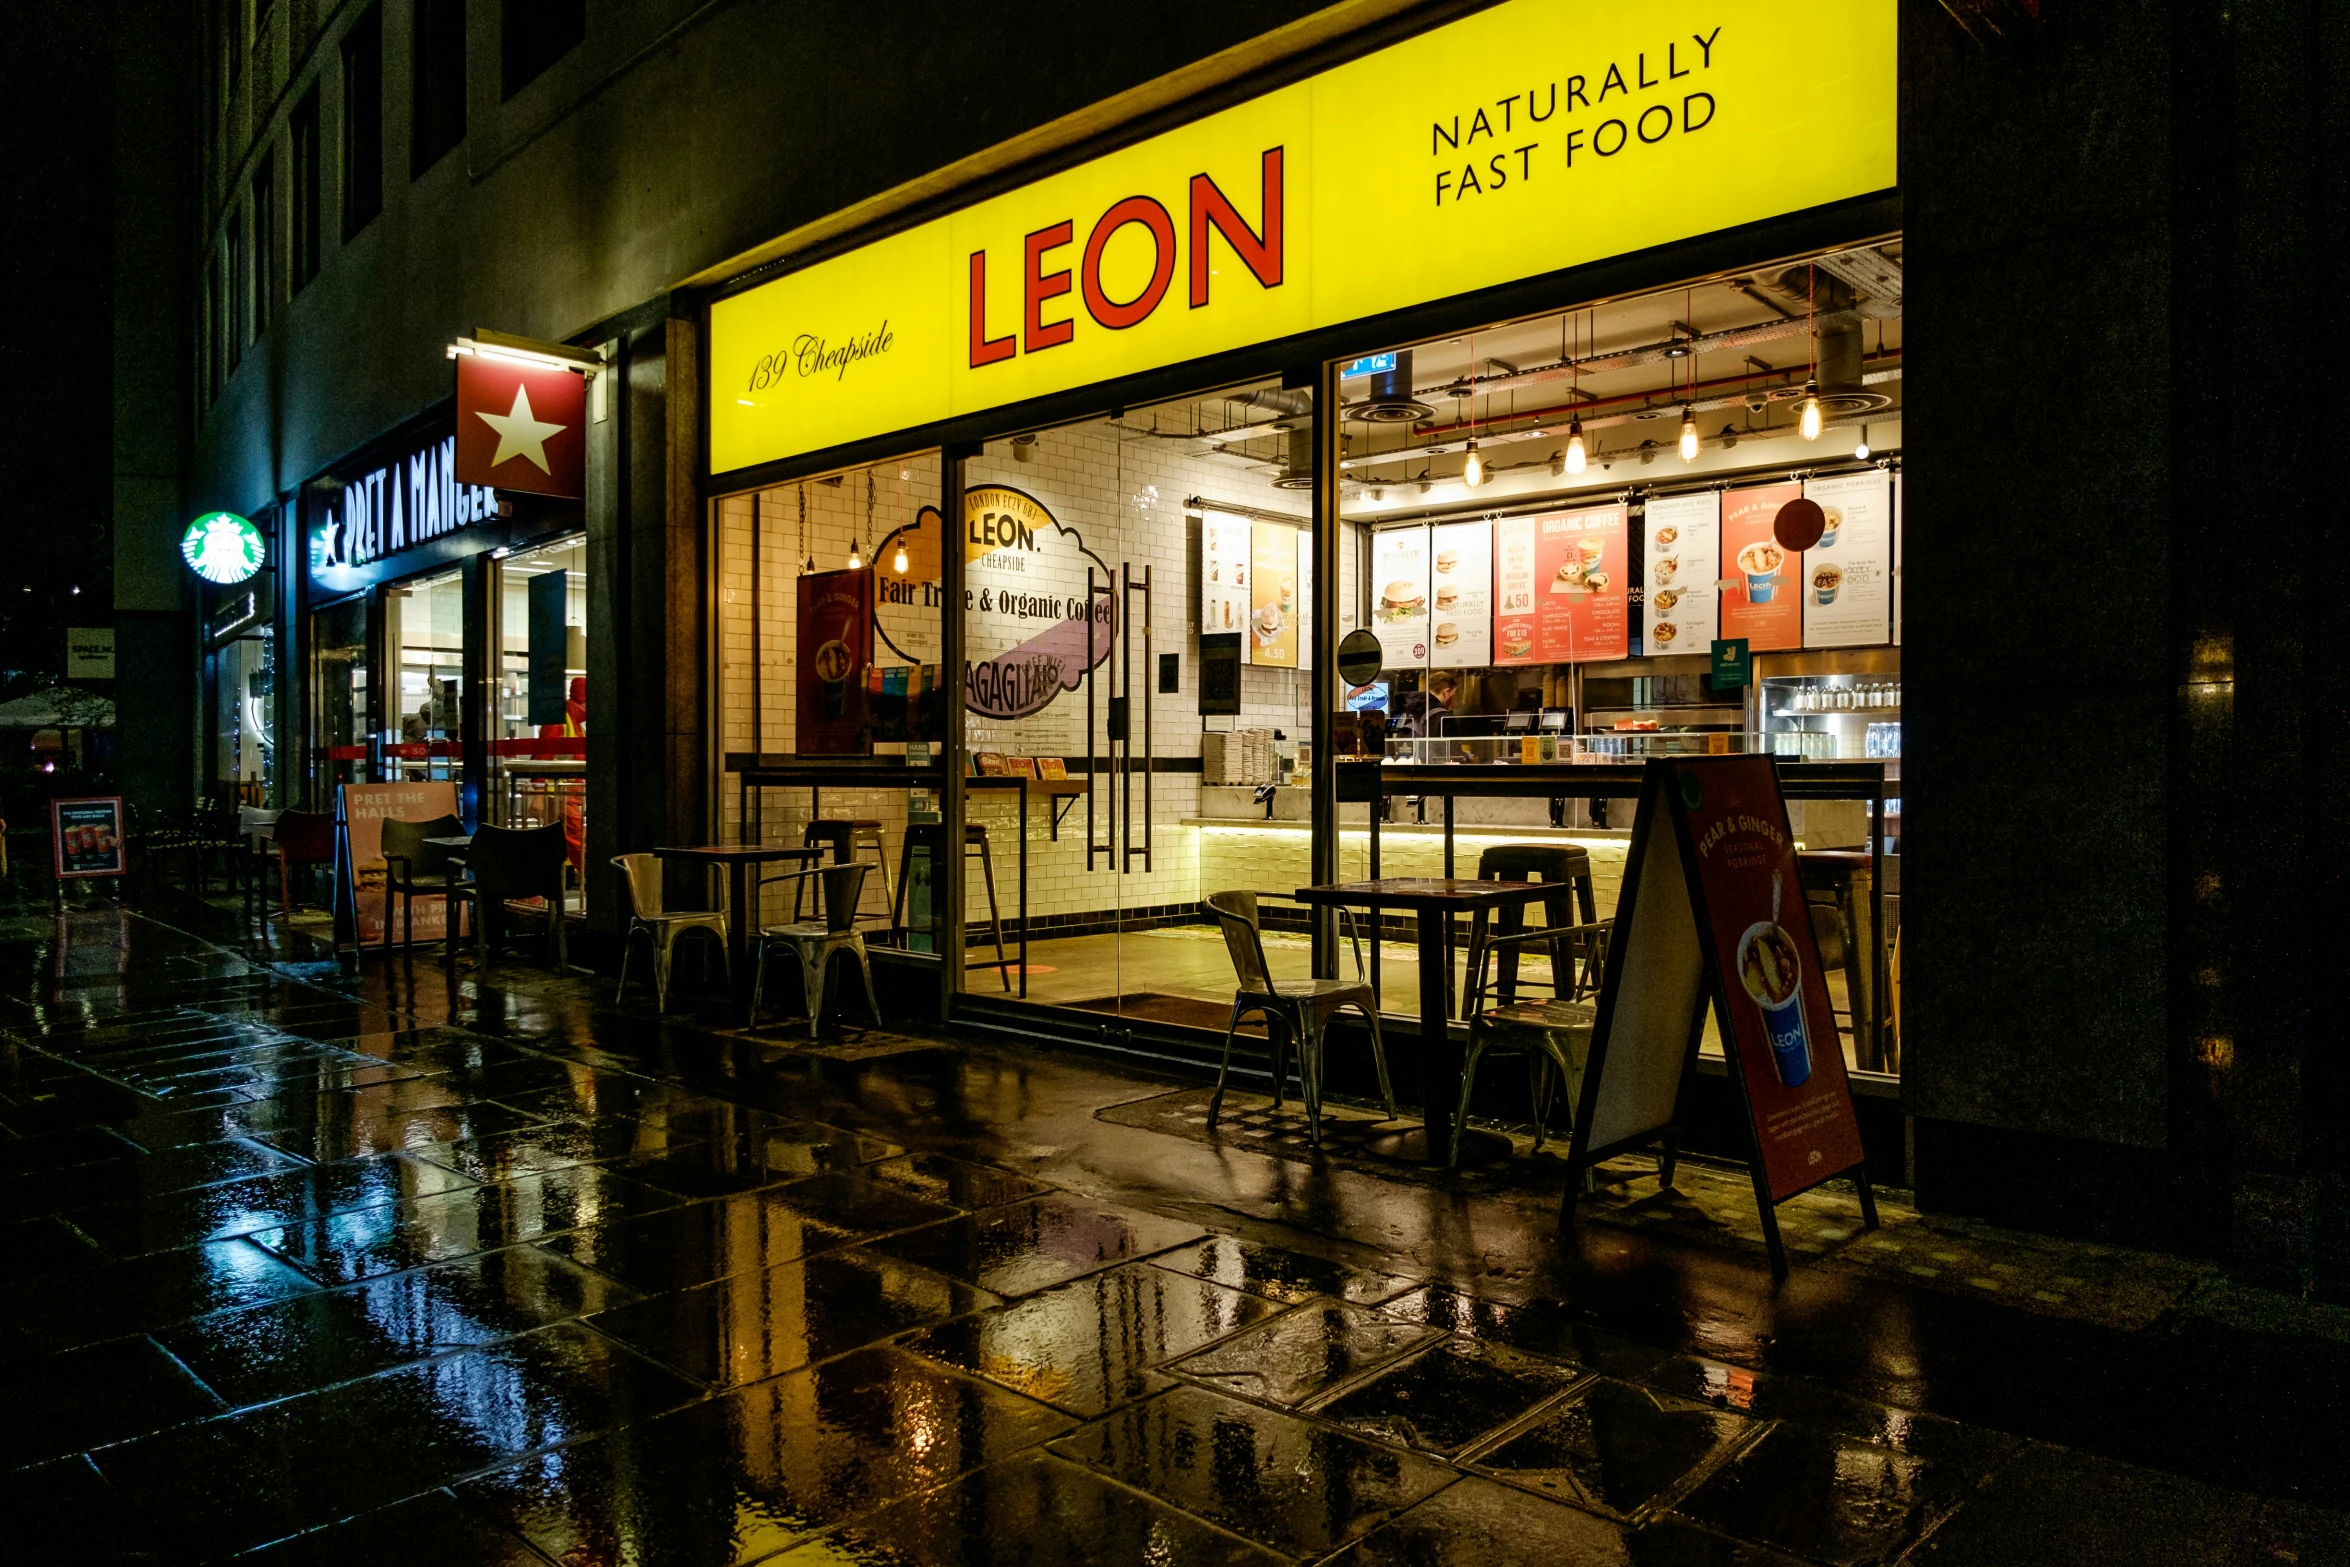 the restaurant has the name leon on the outside